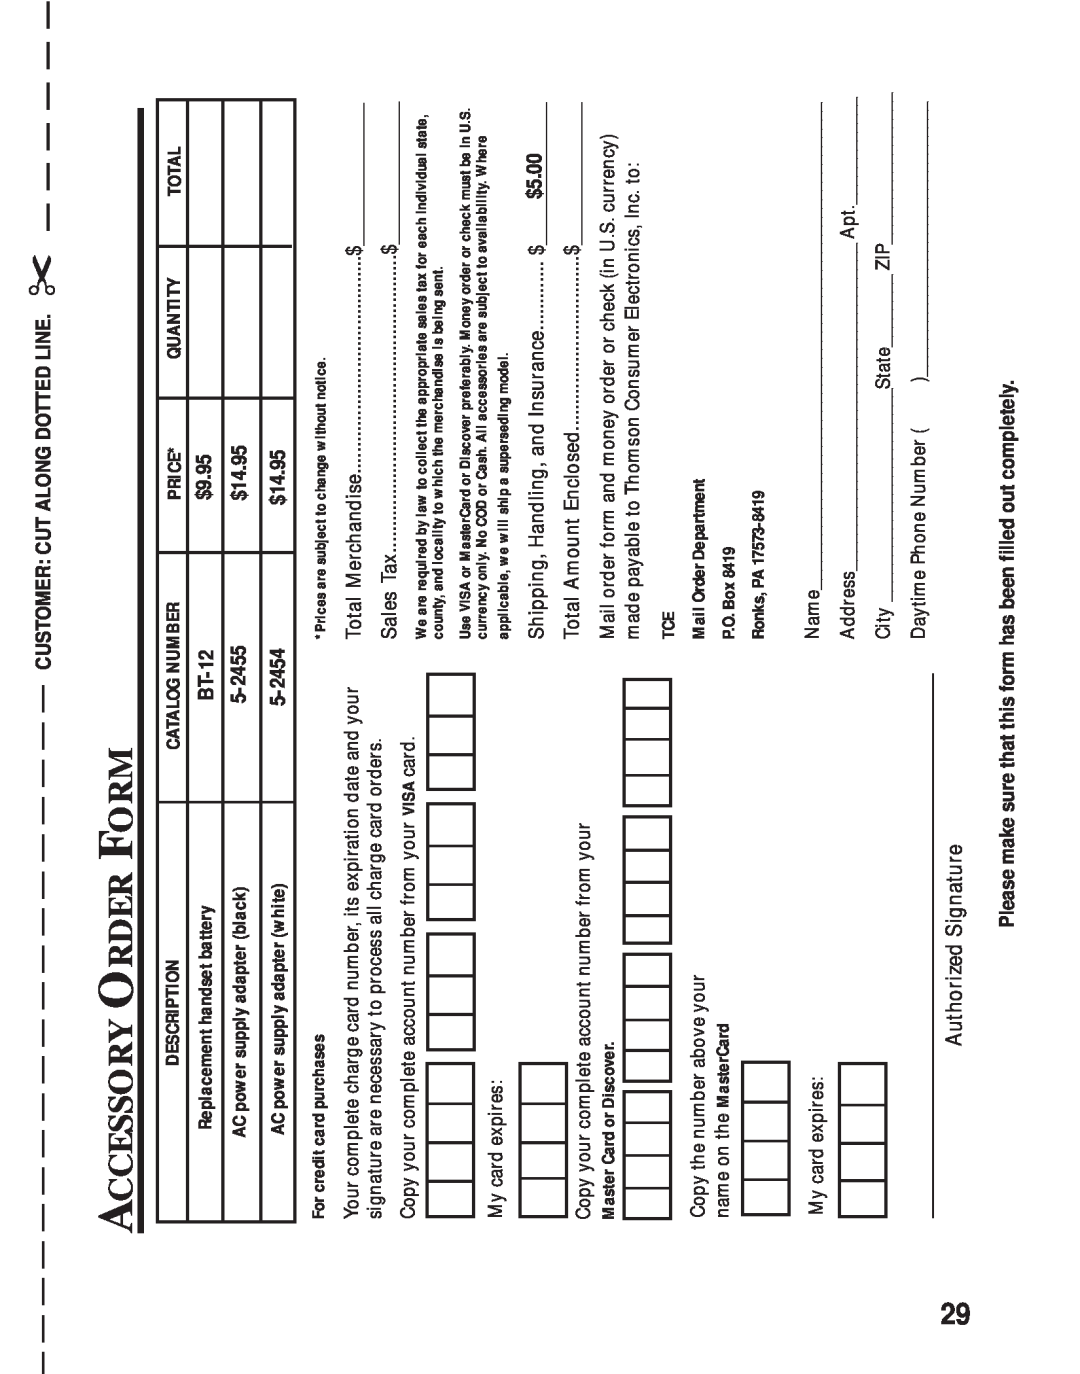 RCA 26730 Accessory Order Form, $9.95, $14.95, Customer Cut Along Dotted Line, Description, Catalog Number, Price, Total 